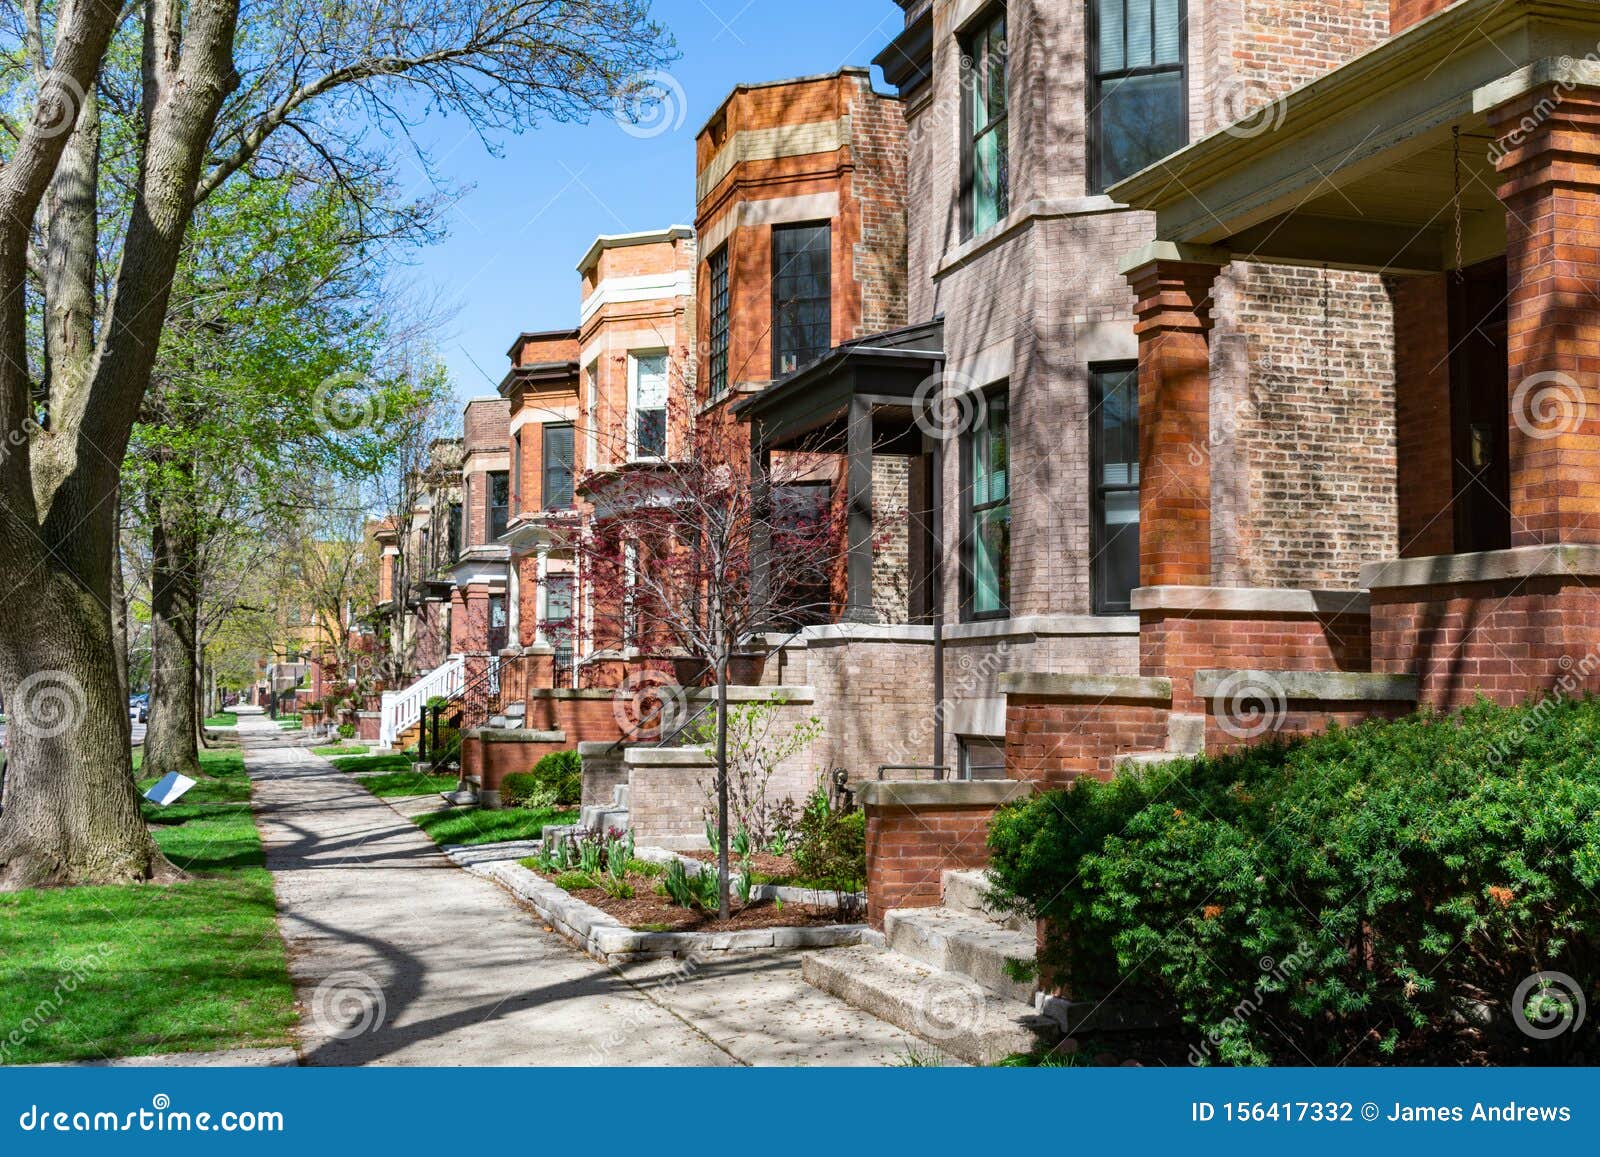 Not every small, brick house in Chicago is a bungalow - by Samantha Clark -  Chicago Cityscape's Blog